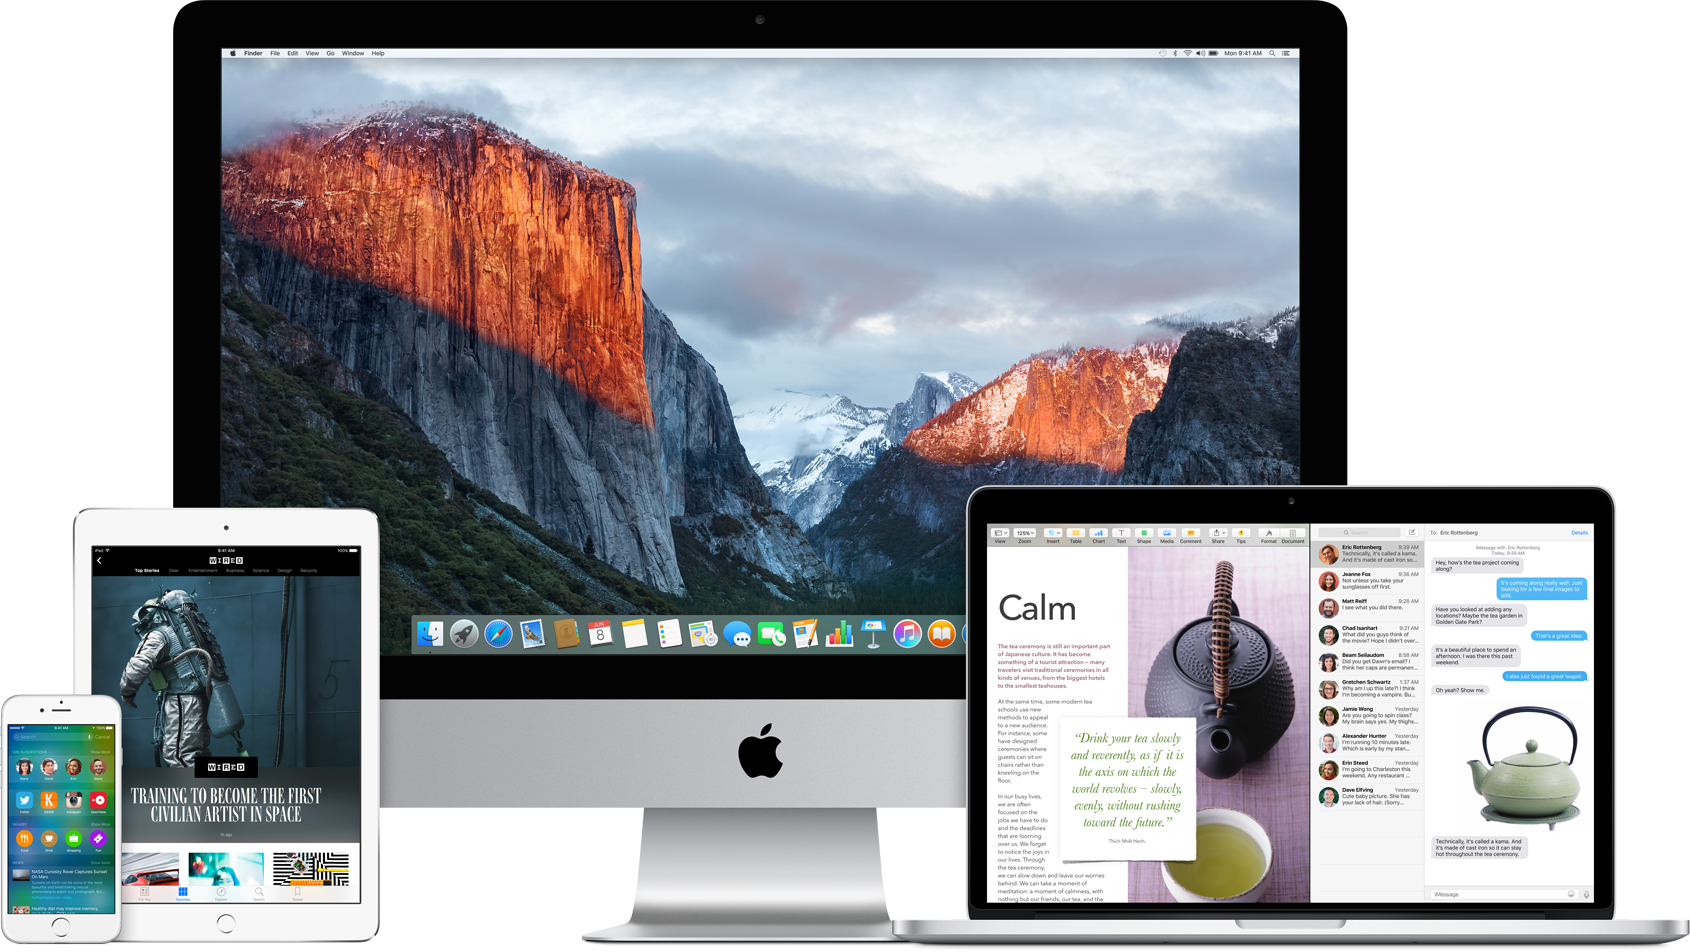 OS X 10.11 El Capitan and iOS 9 will work on all Macs and iGadgets with OS X 10.10 Yosemite and iOS 8